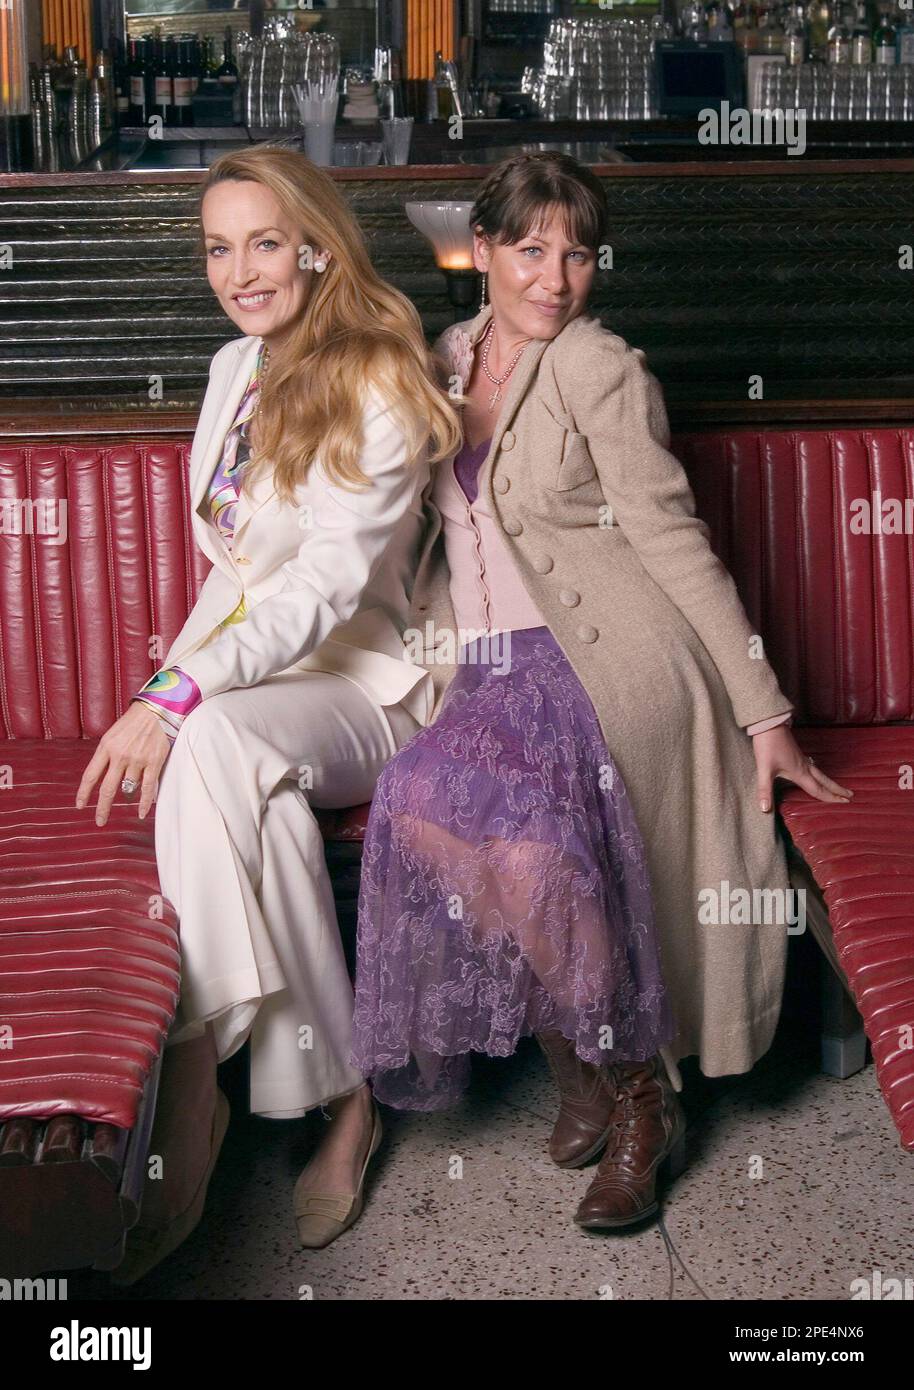 Model and actress Jerry Hall, ex-wife of Mick Jagger, poses with friend Rachel Fuller, right, at La Bottega Cafe at the Maritime Hotel in New York on May 26, 2005